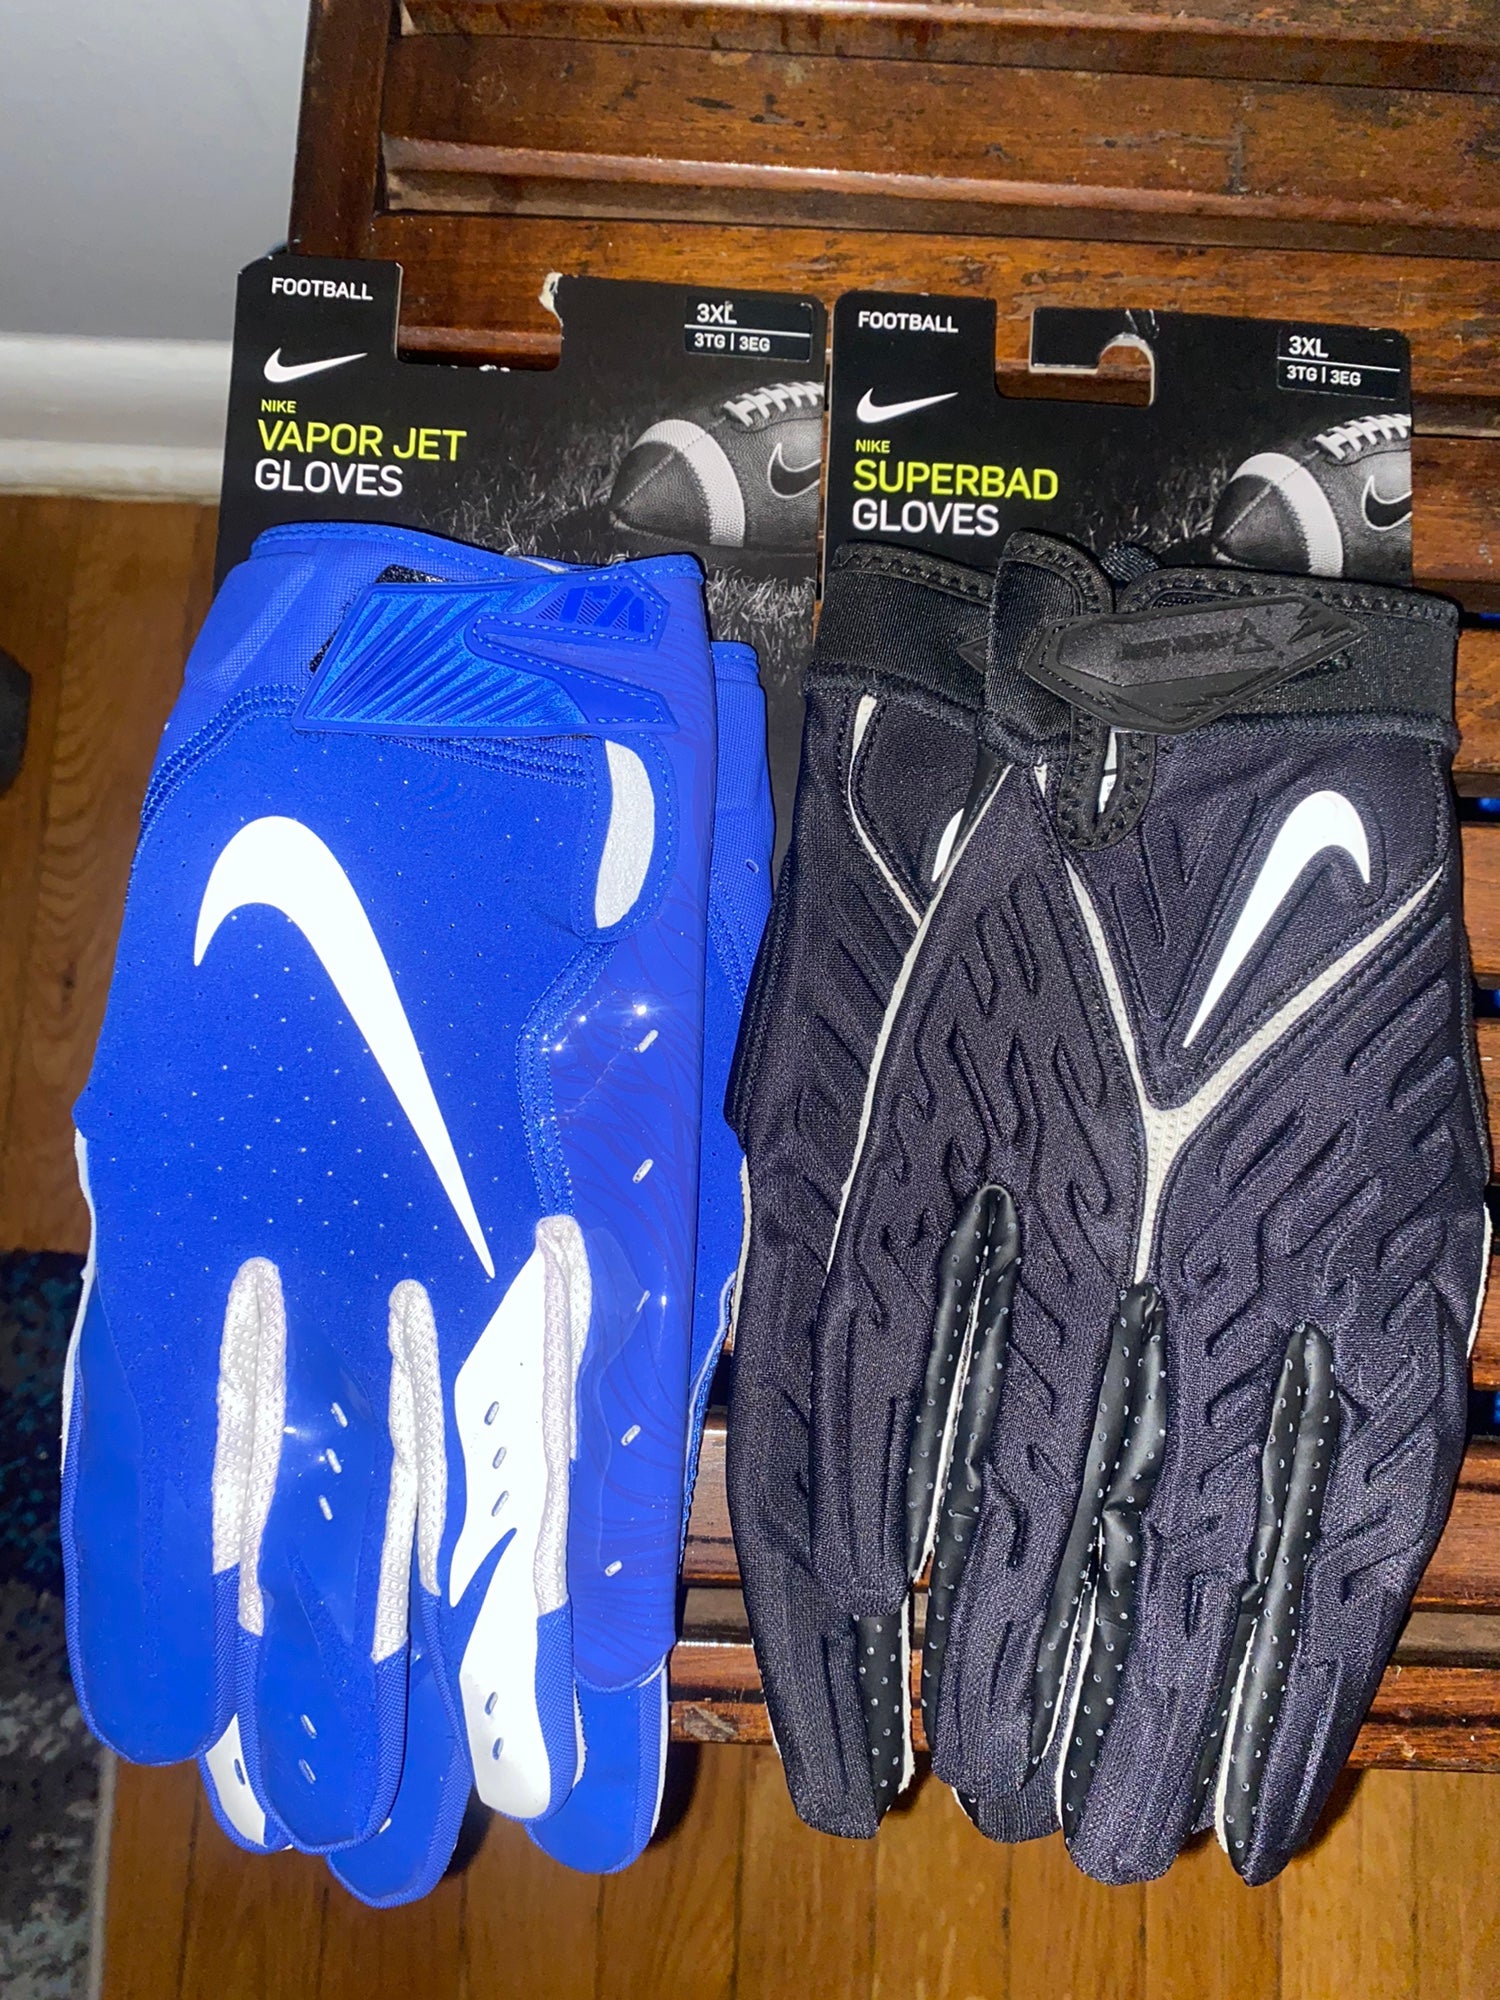 Nike Vapor Jet Football Gloves for sale | New and Used on SidelineSwap